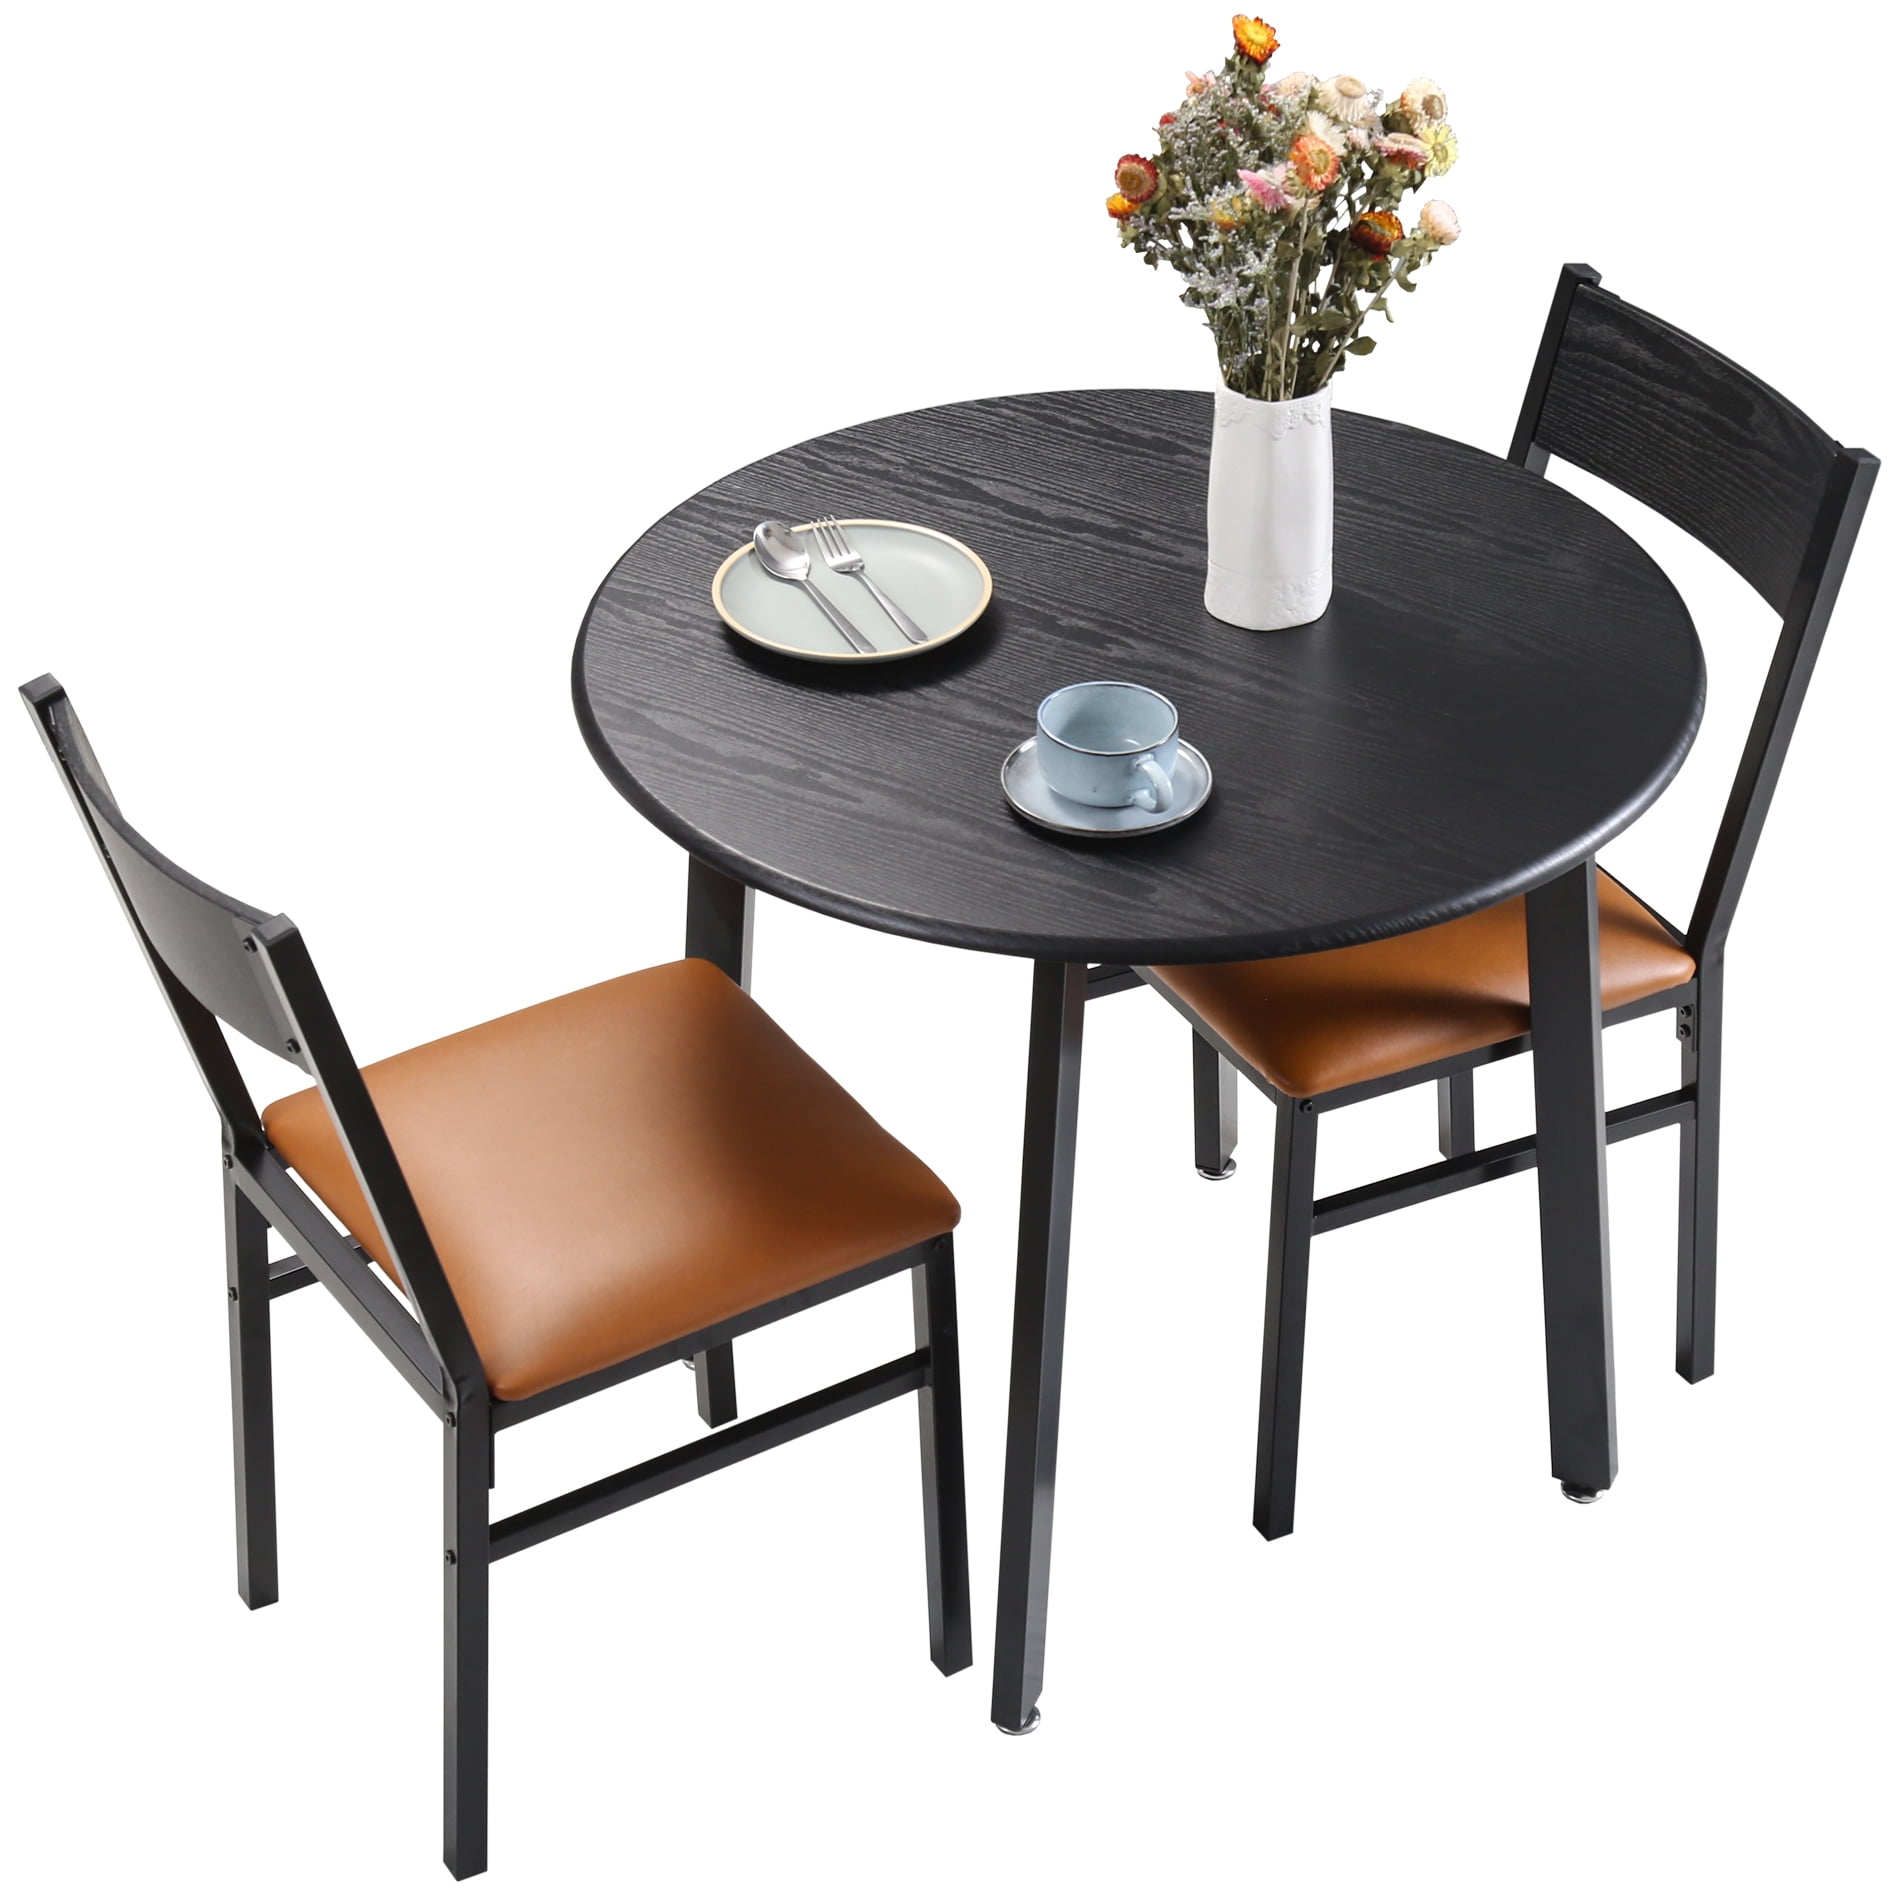 3 Piece Round Dining Table Set With, Round Kitchen Table Set For Small Spaces